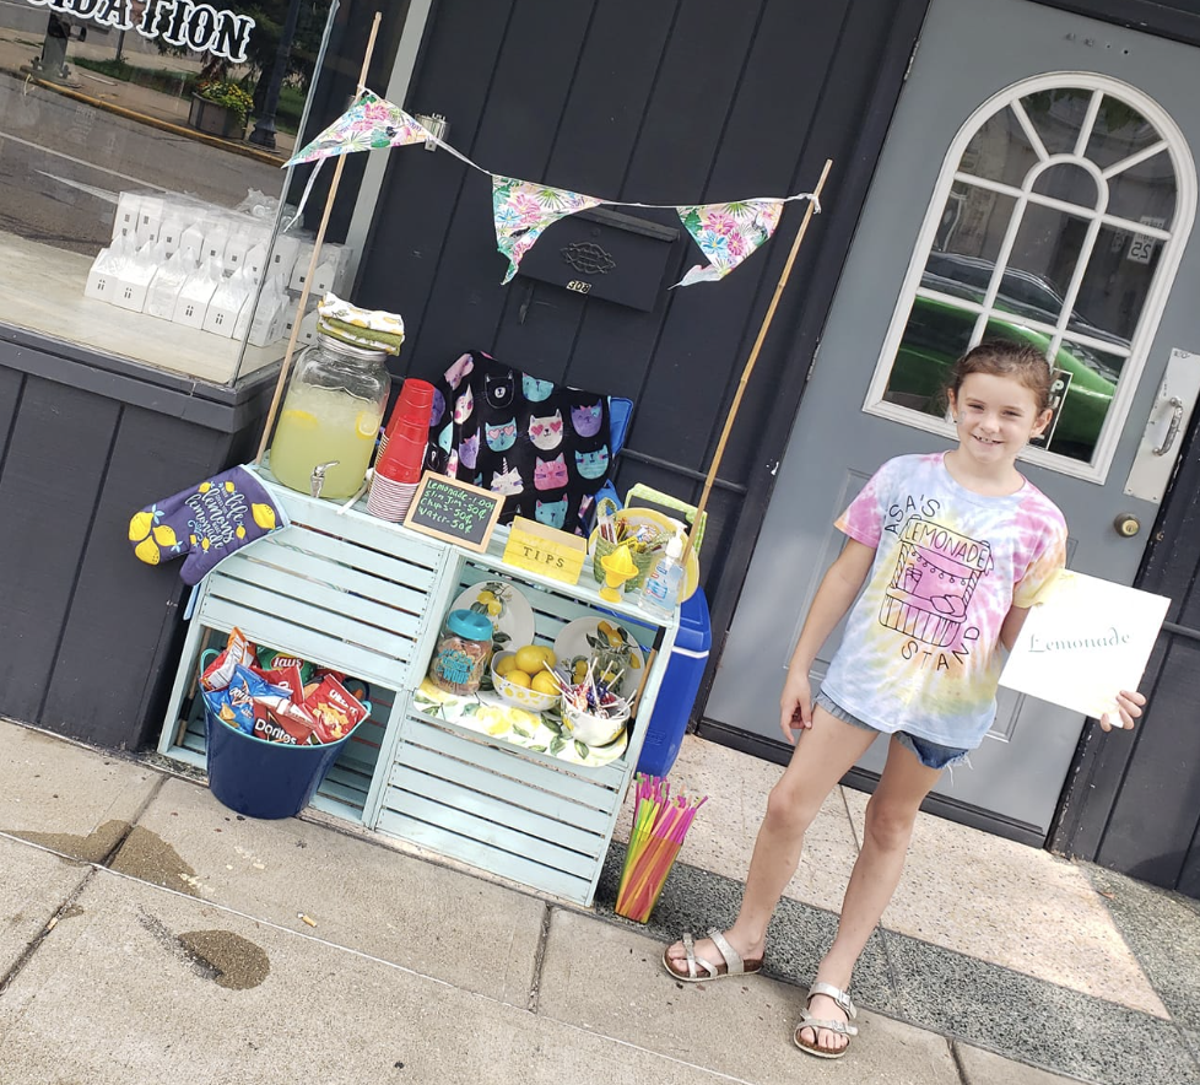 Eight-year-old girl’s lemonade stand is shut down by police because she didn’t have a permit